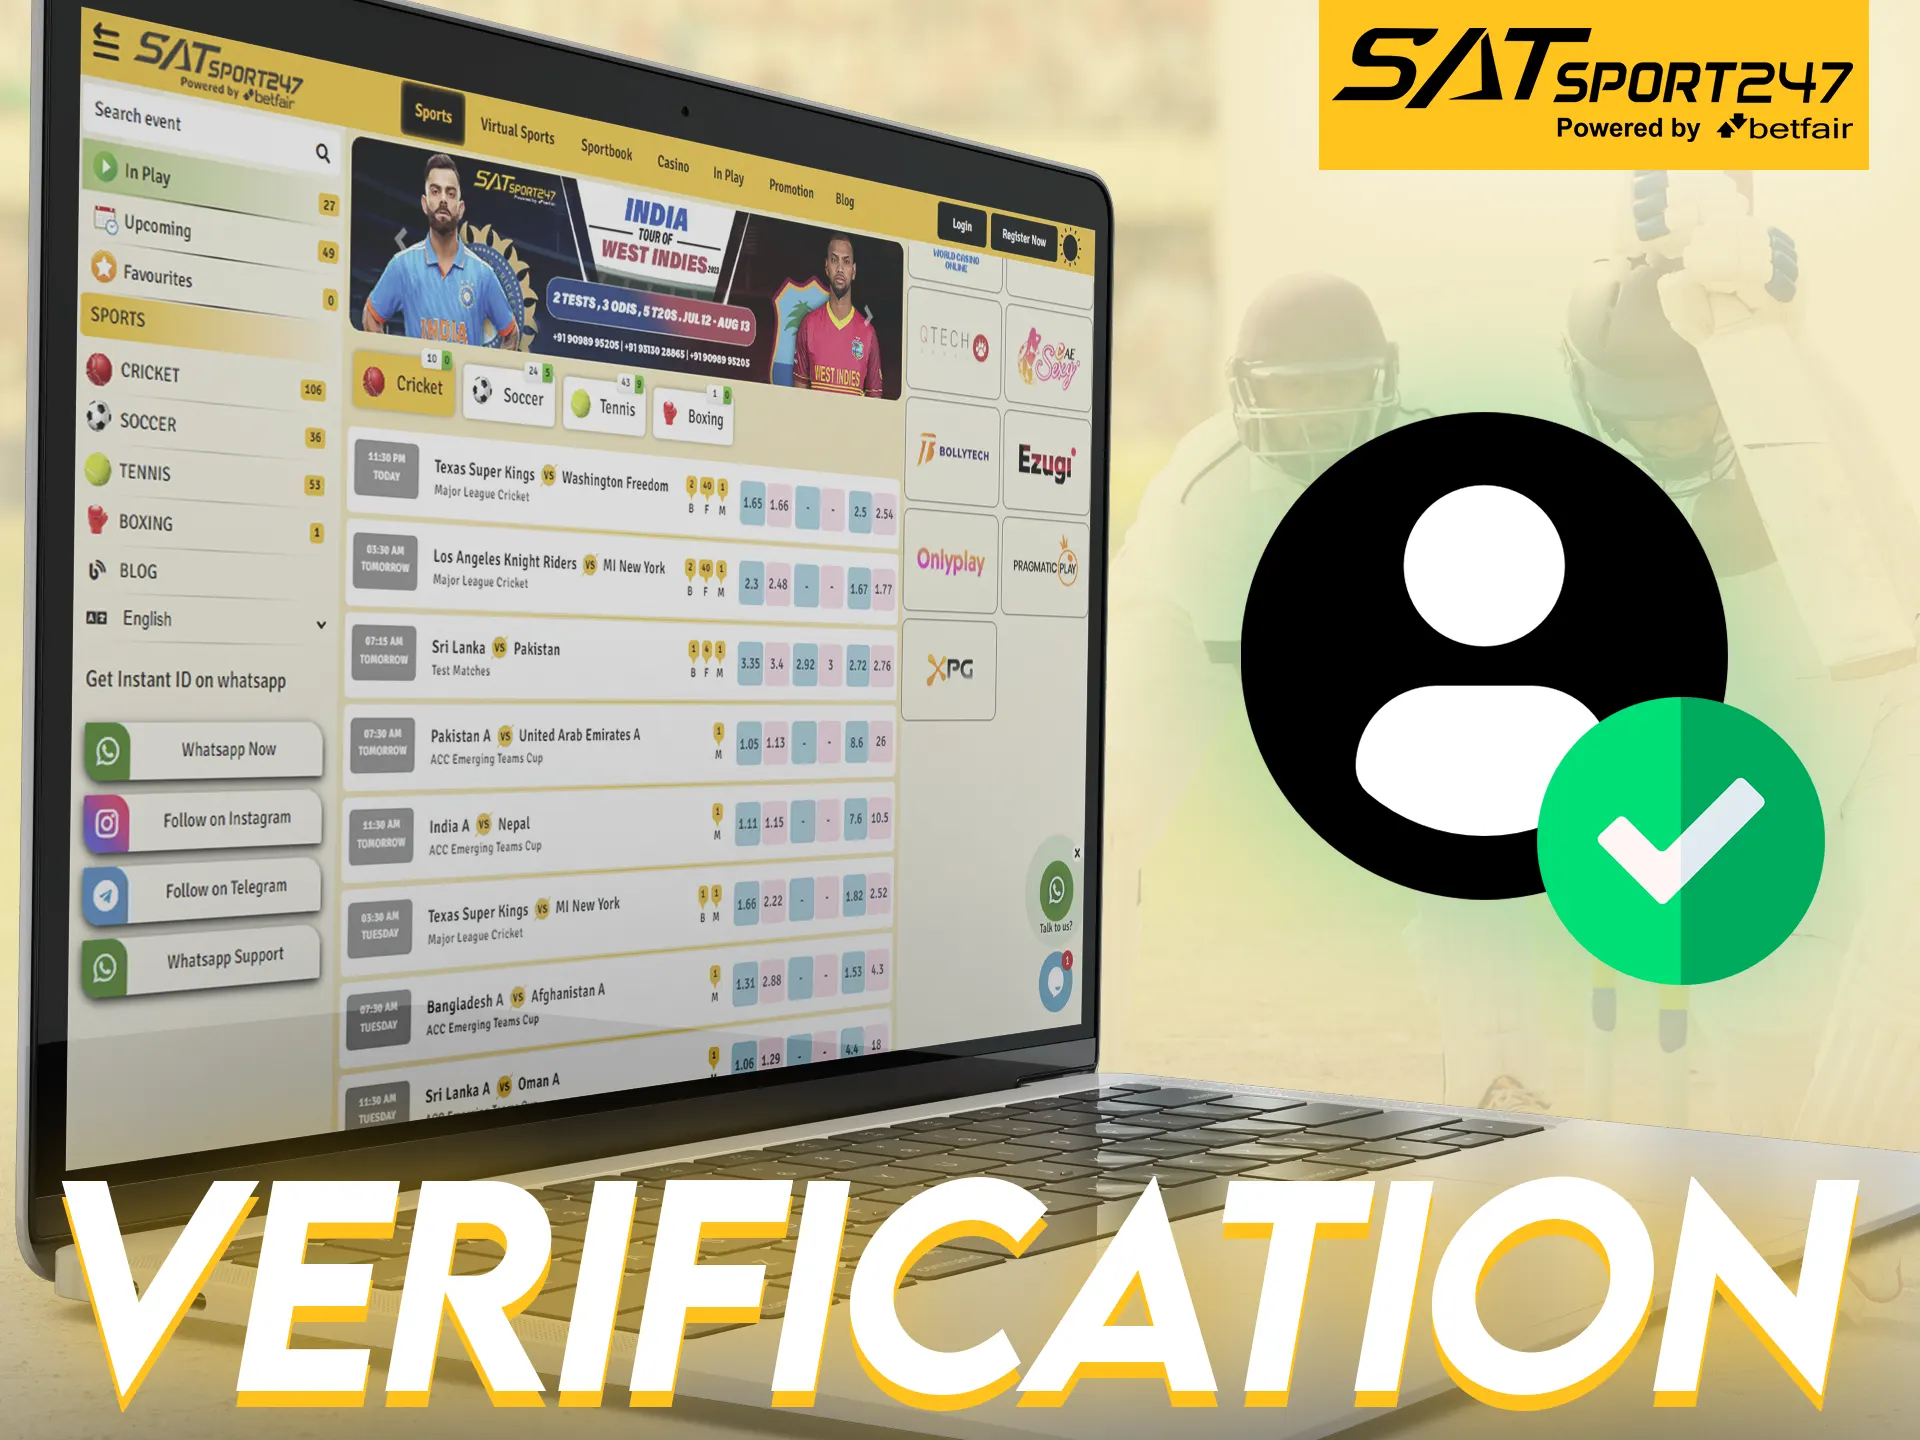 Confirm your identity with Satsport247 to gain access to all features.